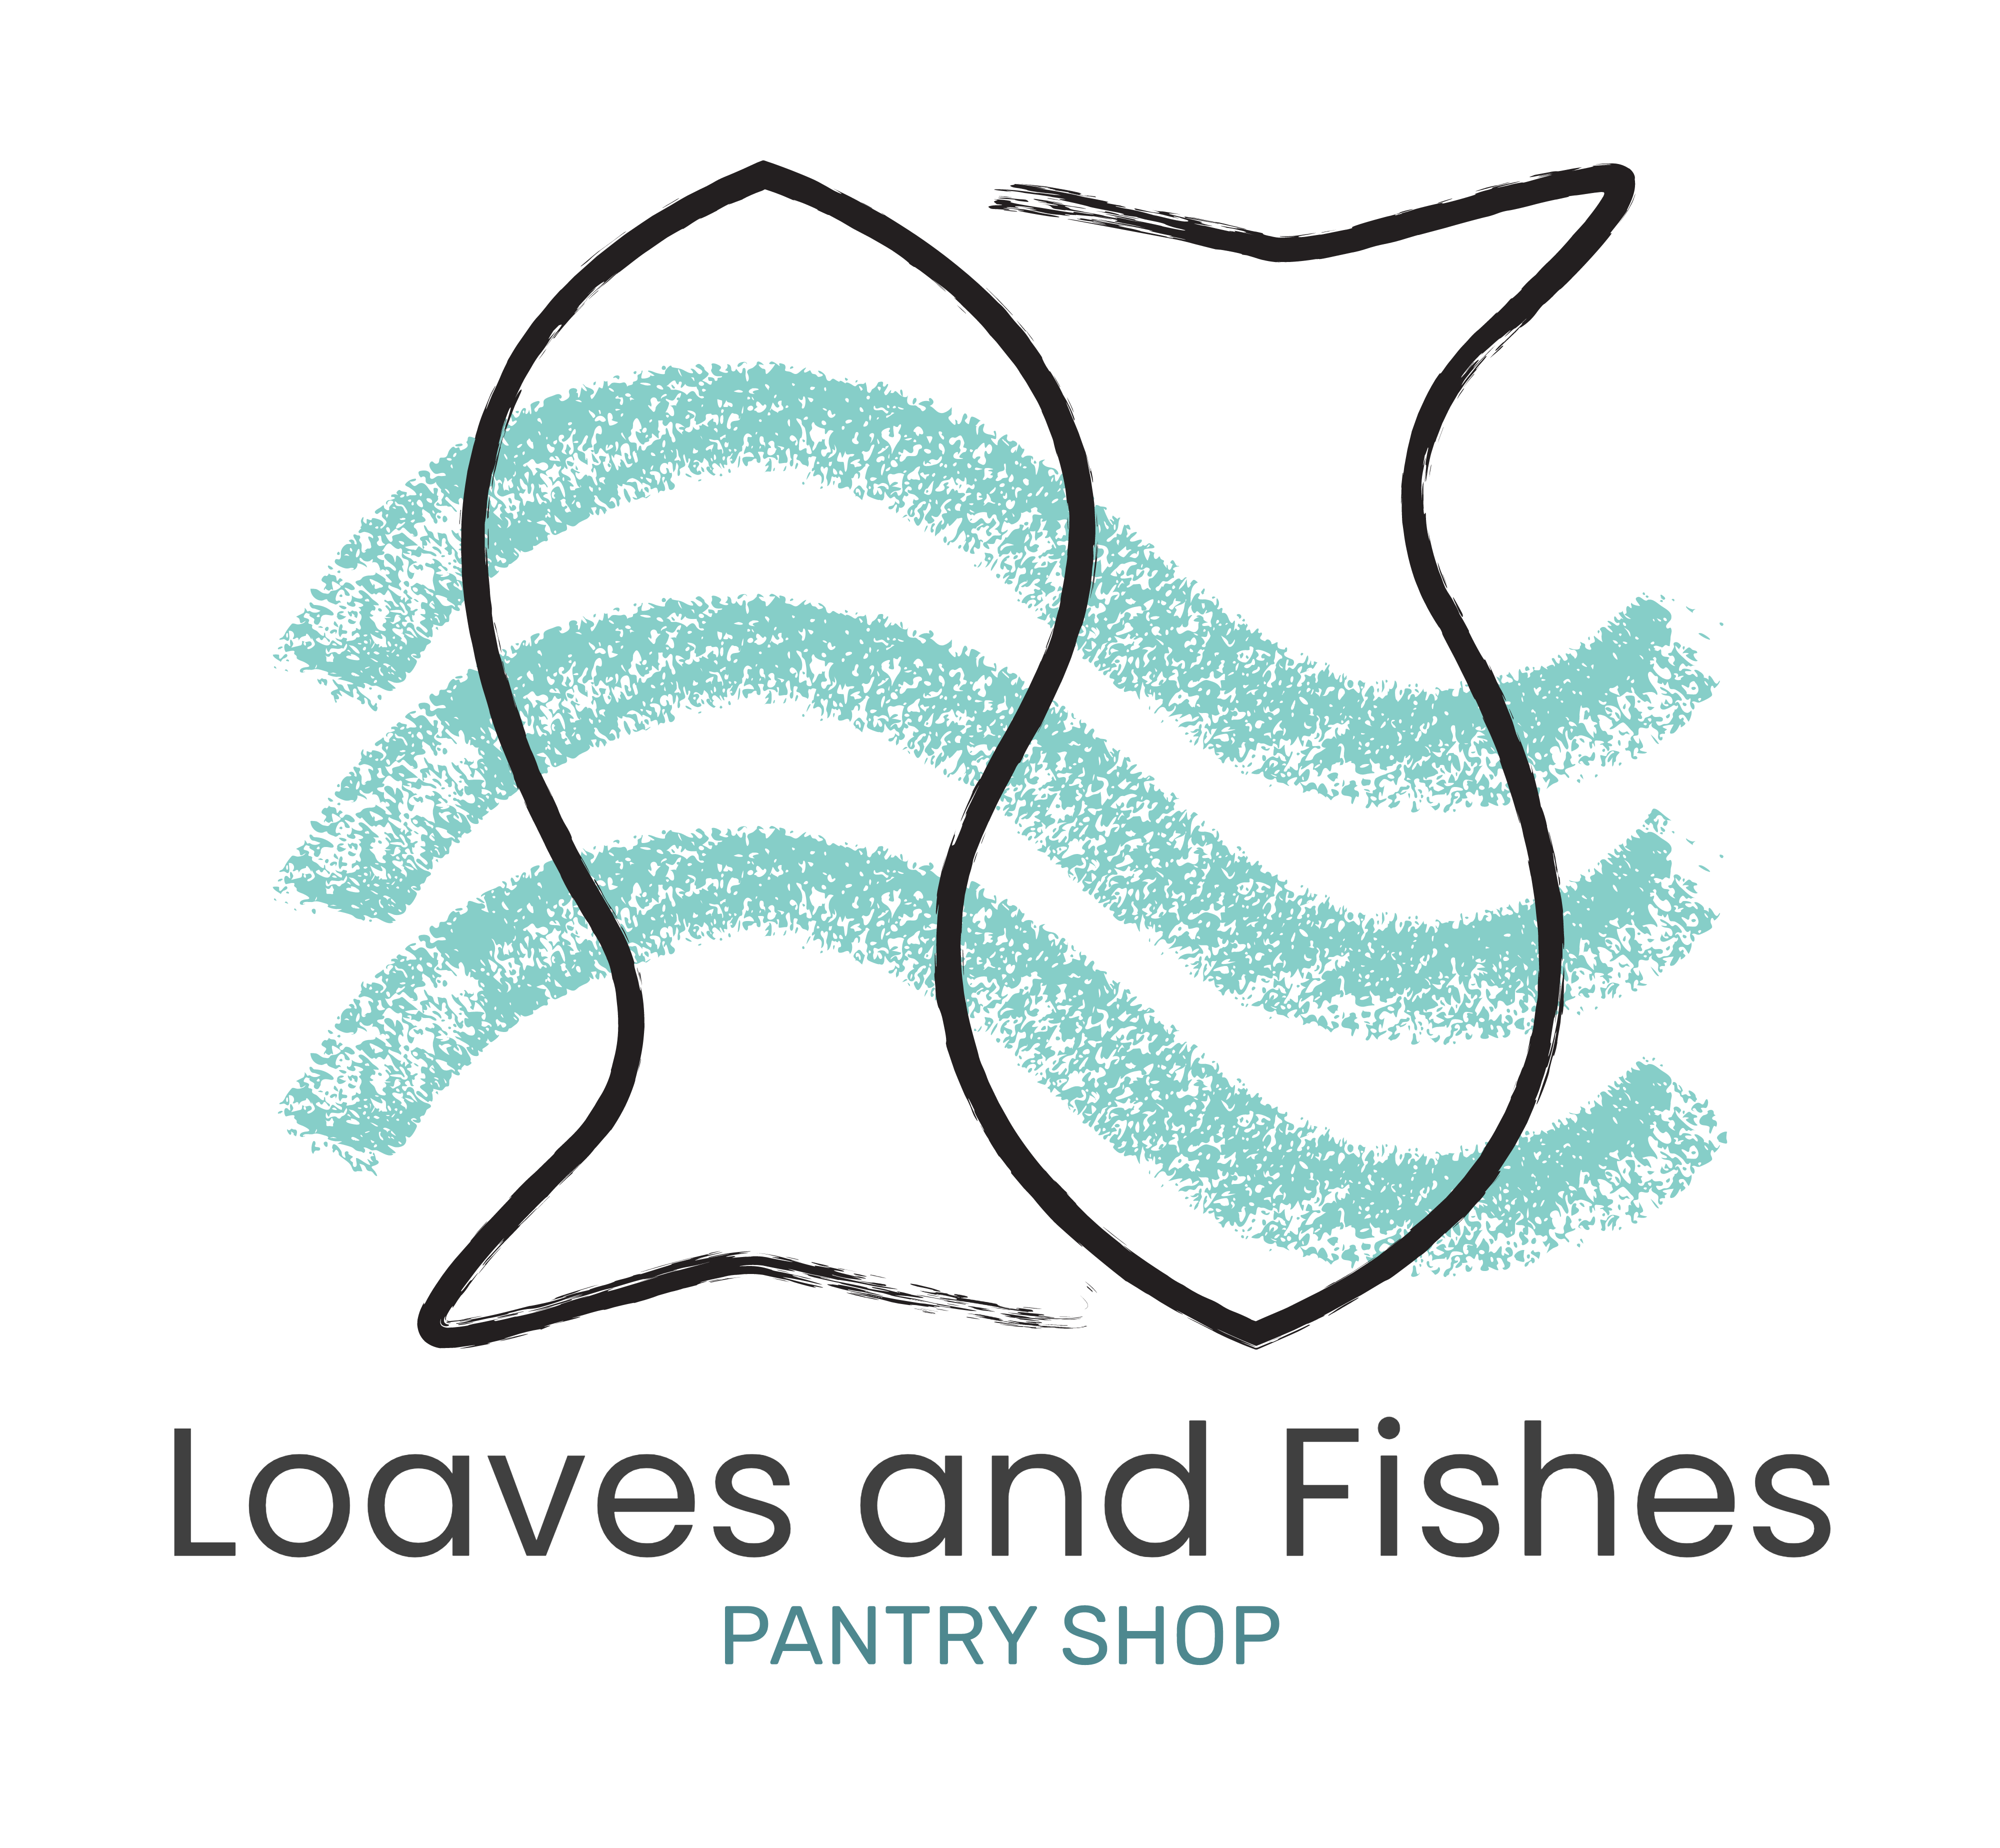 The Loaves and Fishes Pantry Shop is based at the Alfreton Christian Centre